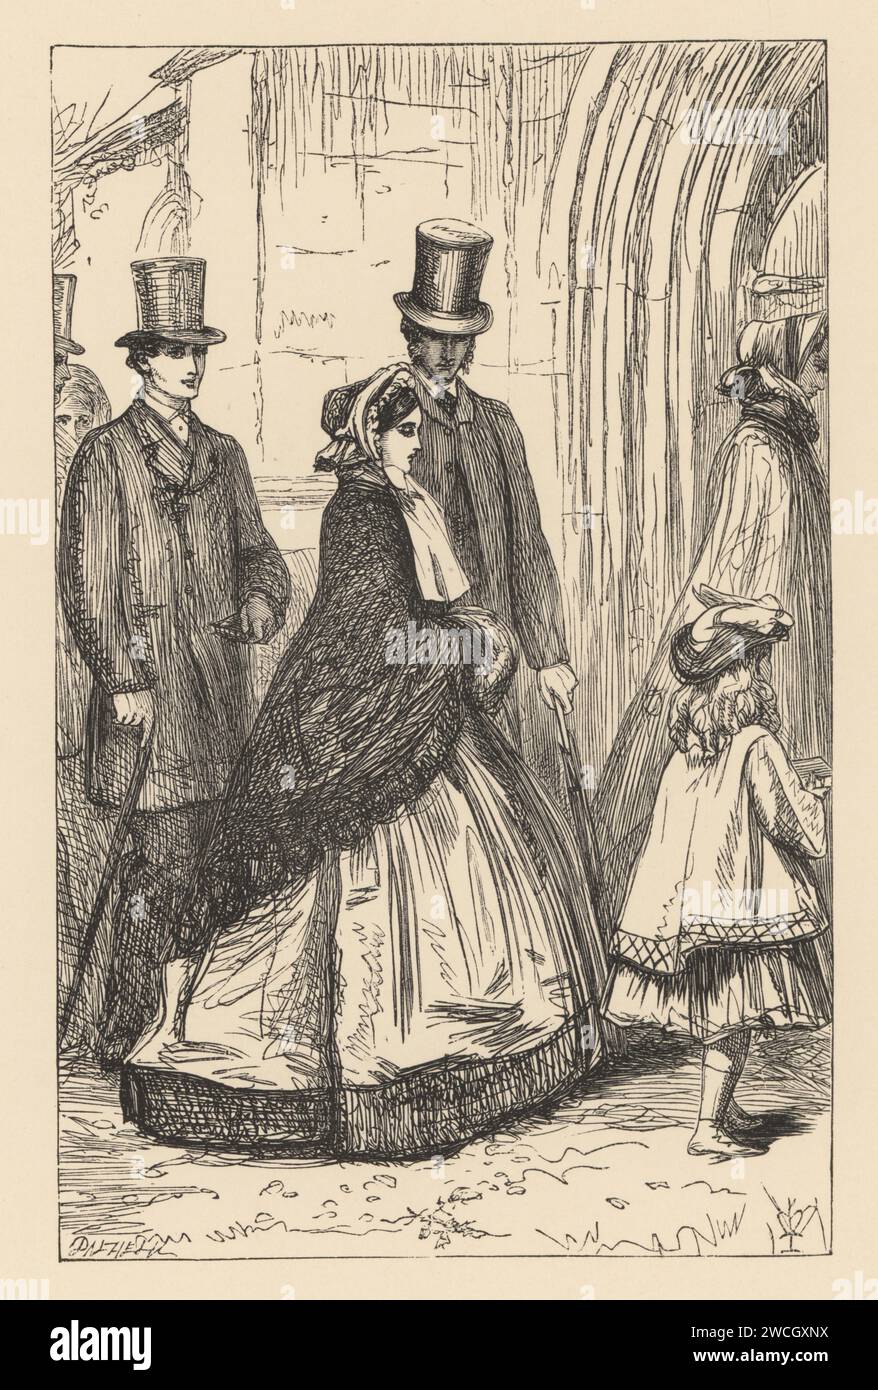 A Victorian family in Sunday best entering a church for a service. Christmas a Noningsby, Morning. Book illustration from Anthony Trollope’s Orley Farm. Woodcut by the Dalziel brothers after an illustration by Pre-Raphaelite artist John Everett Millais from Millais’ Illustrations, a Collection of Drawings on Wood, Alexander Strahan, London, 1866. Stock Photo